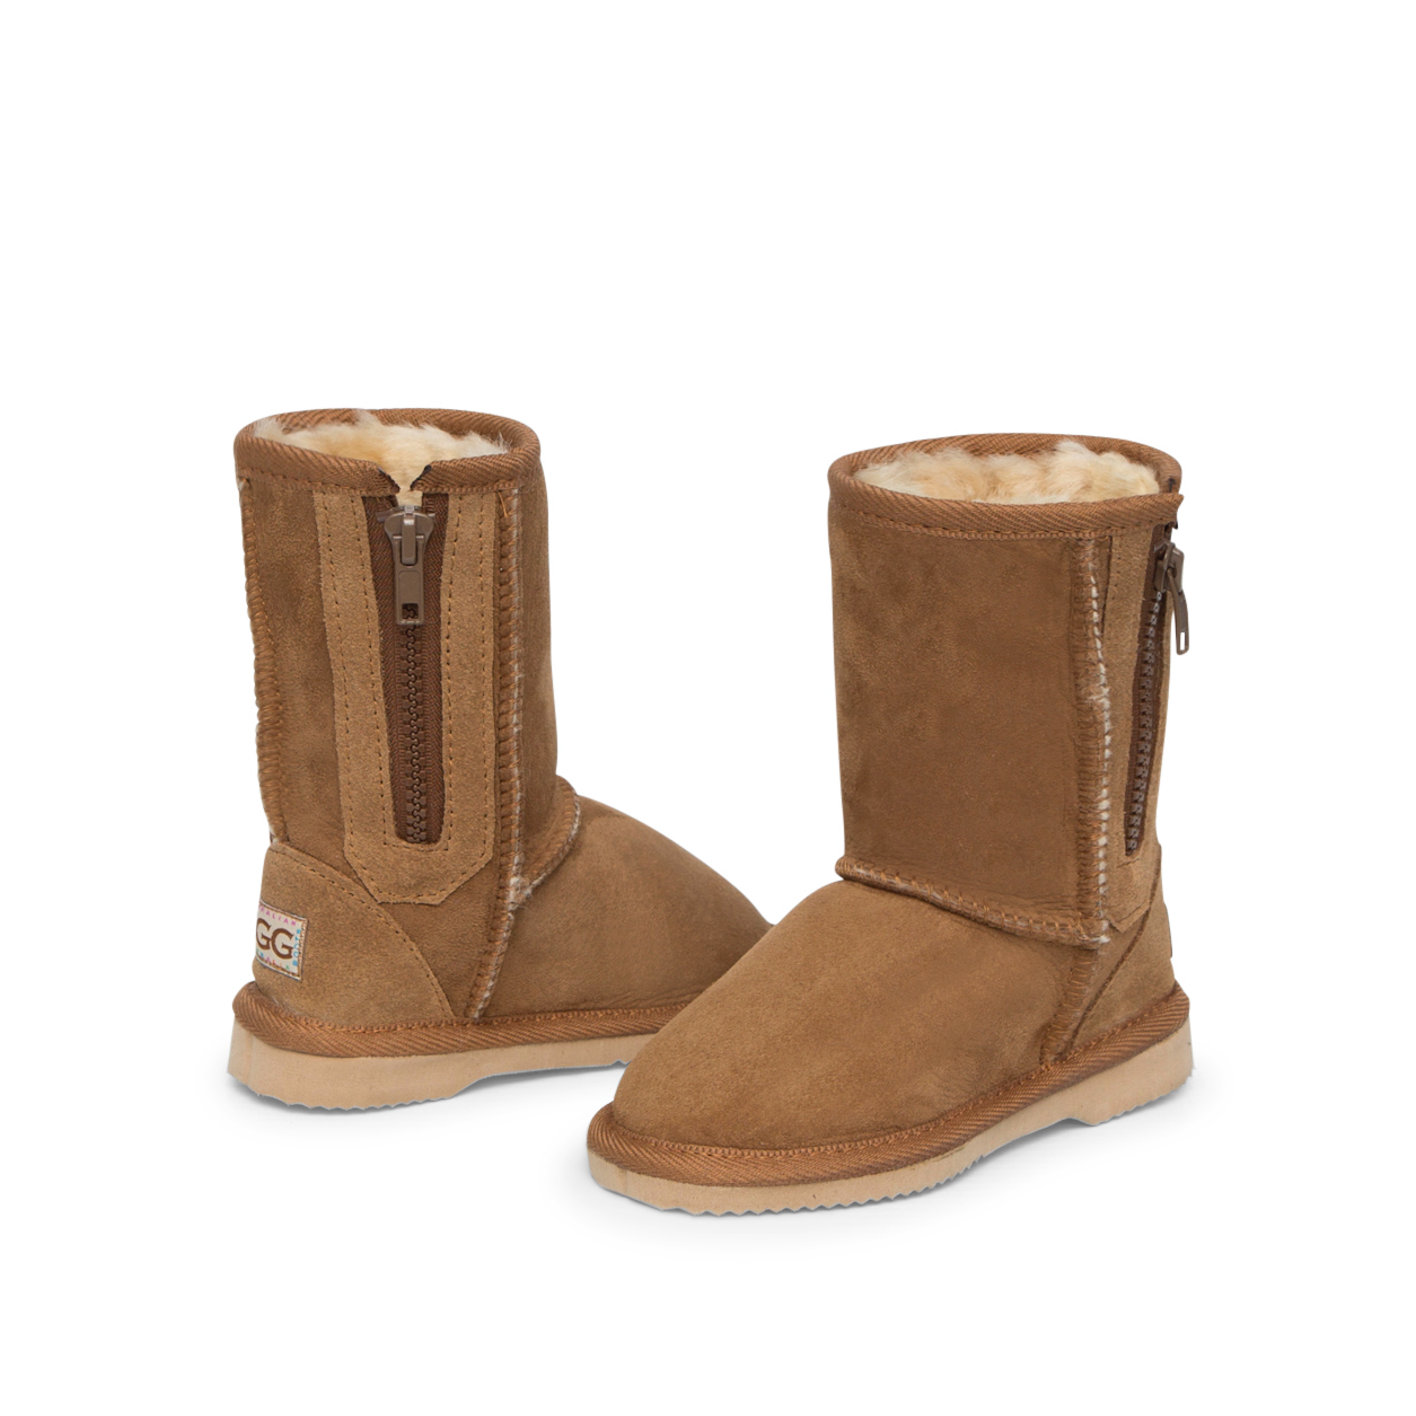 Kid's Breezer Ugg Boots, with a zip in Chestnut.